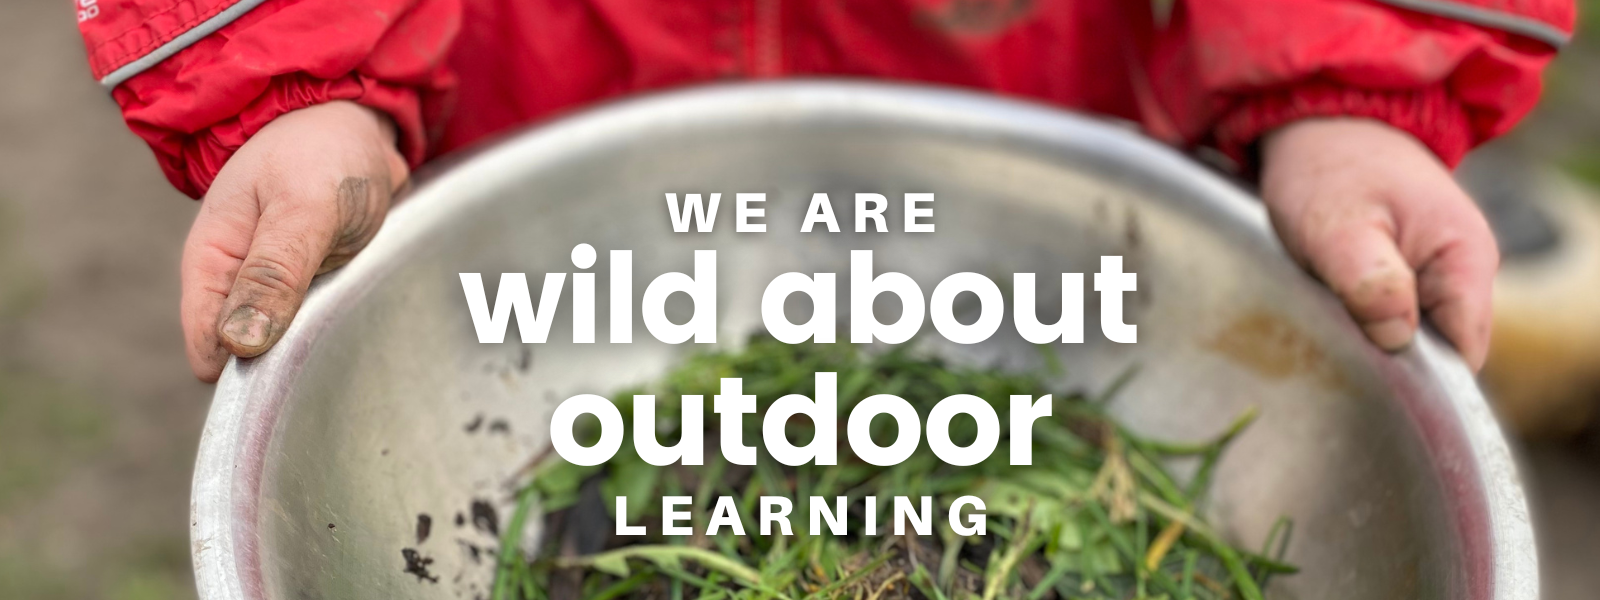 wild about outdoor education